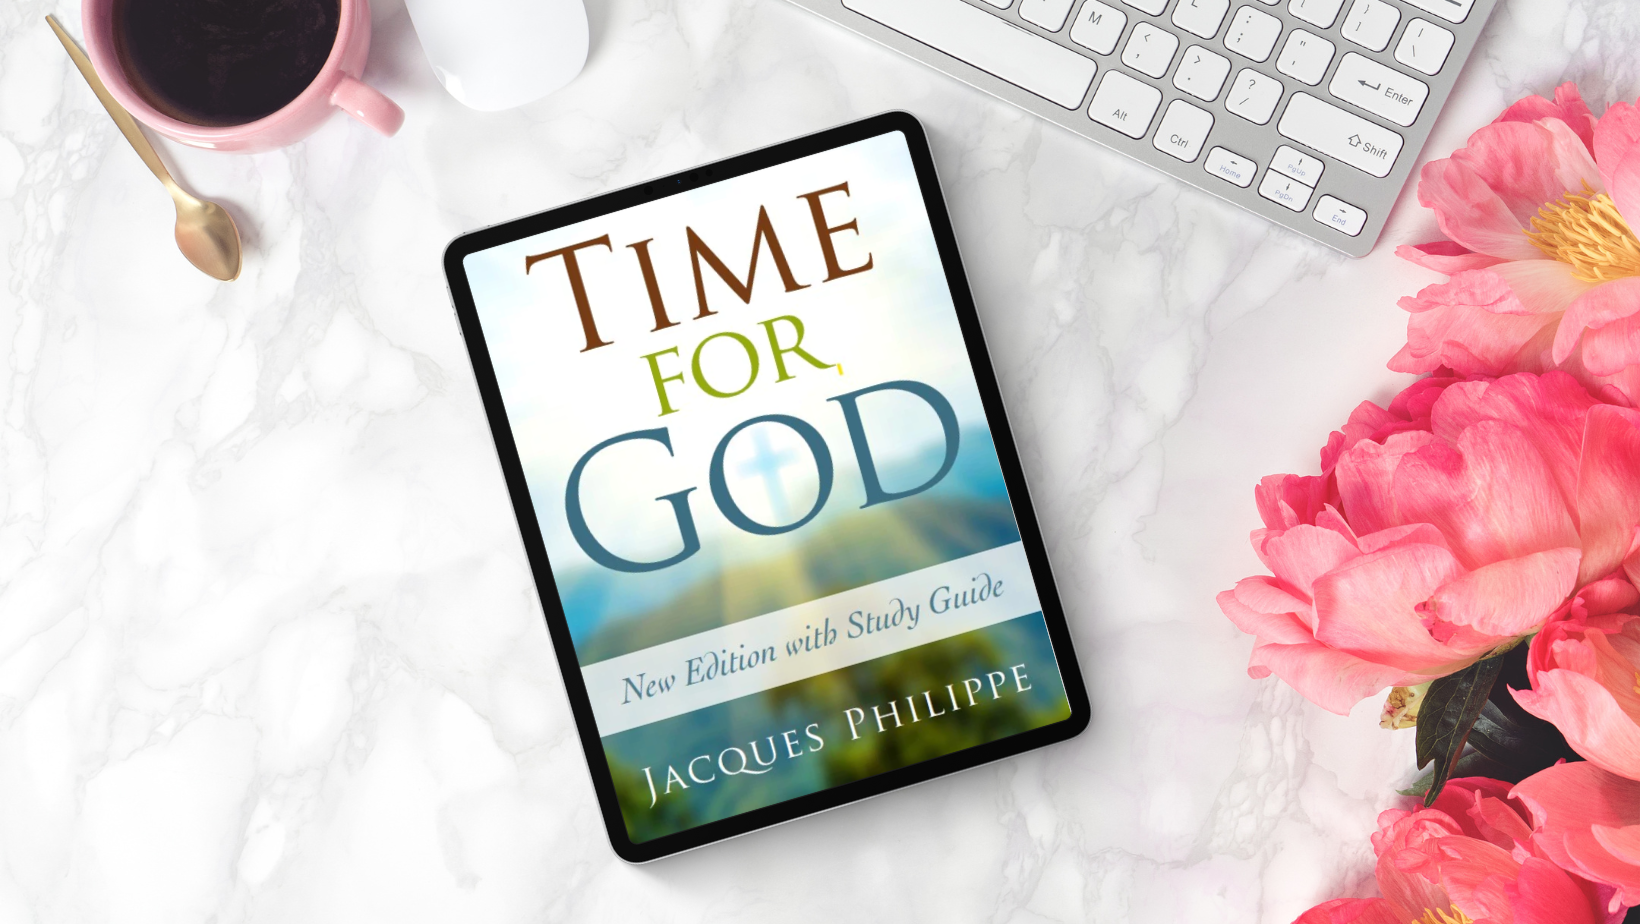 What’s different about the second edition of Time for God by Jacques Philippe?